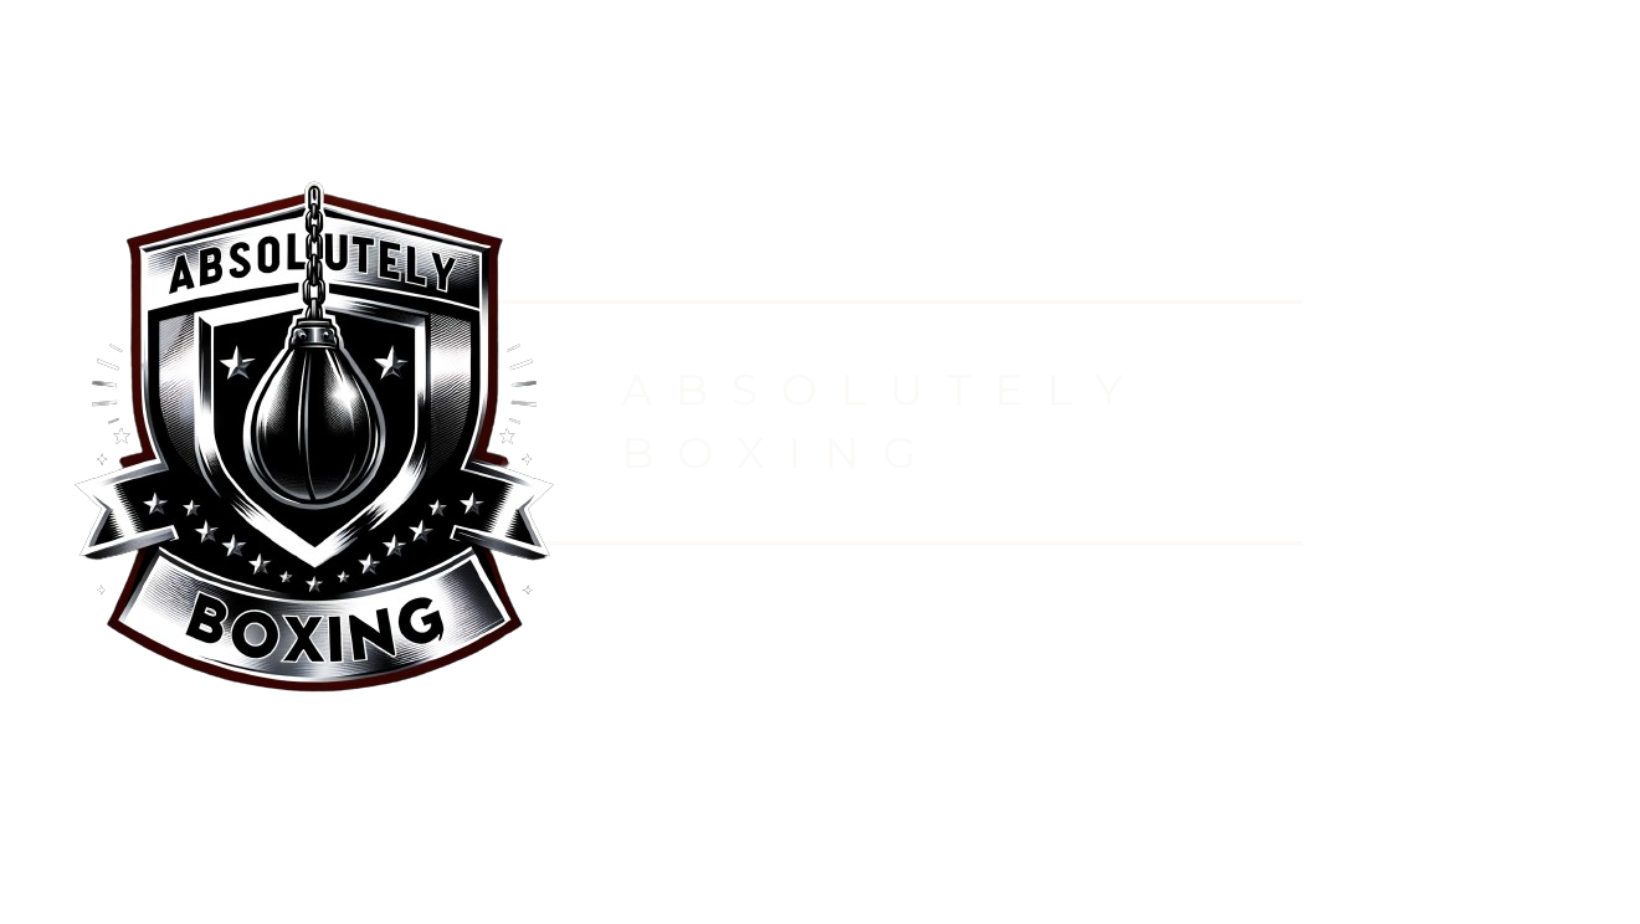 Absolutely Boxing